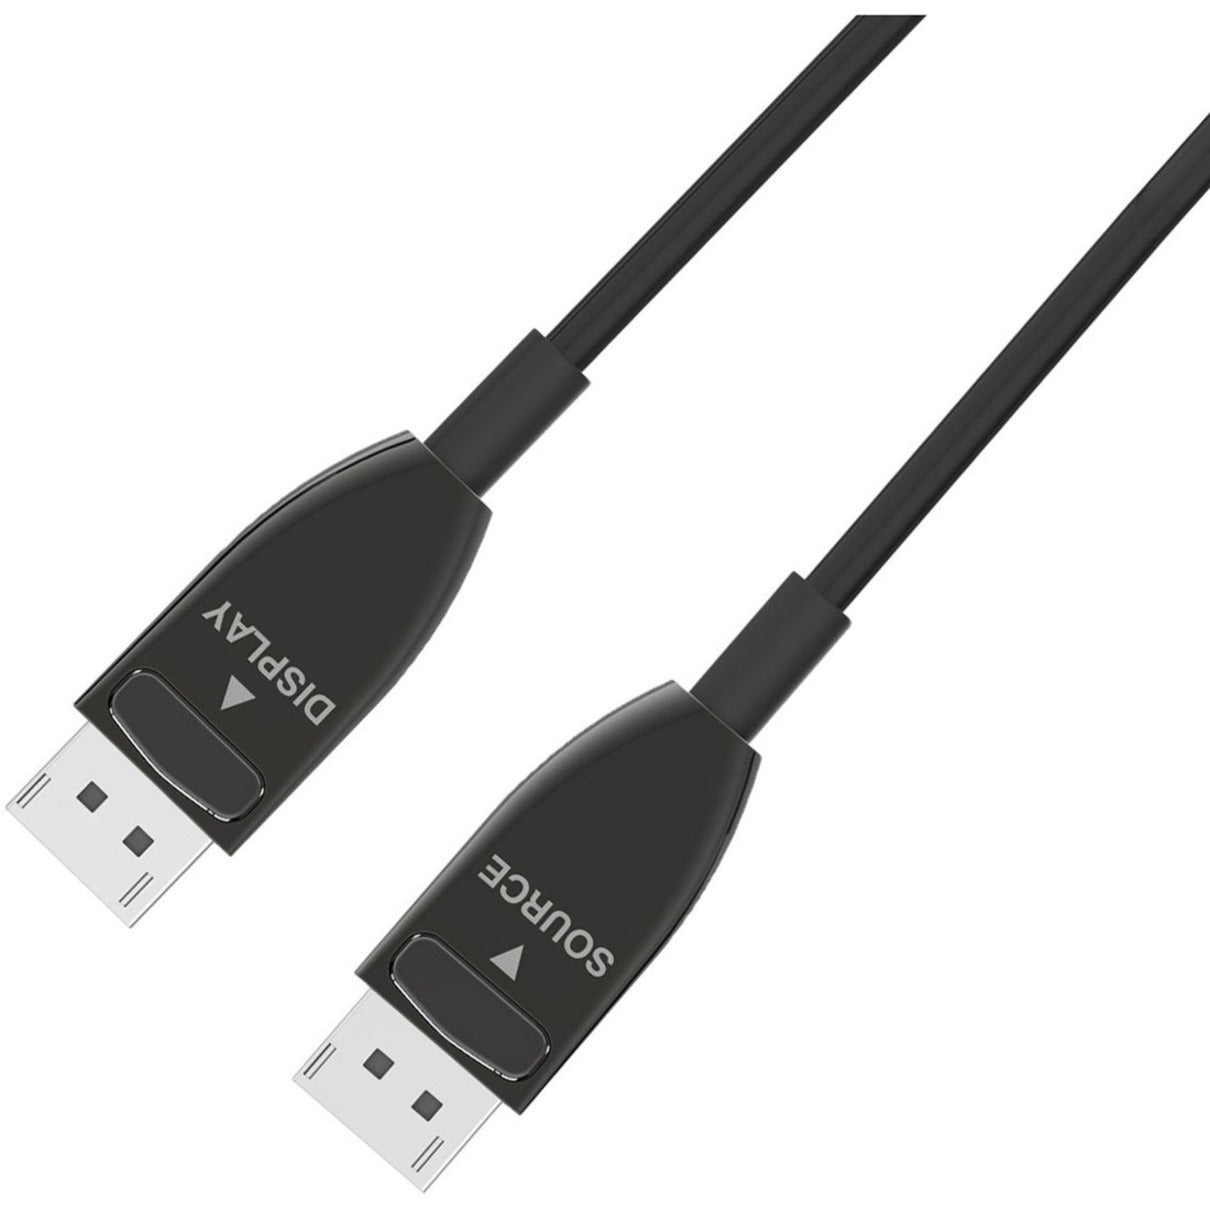 4XEM 4XFIBERDPAOC20M 20M 65ft Active Optical Fiber 1.4 DisplayPort Cable, EMI/RF Protection, 32.4 Gbit/s Data Transfer Rate, 7680 x 4320 Supported Resolution